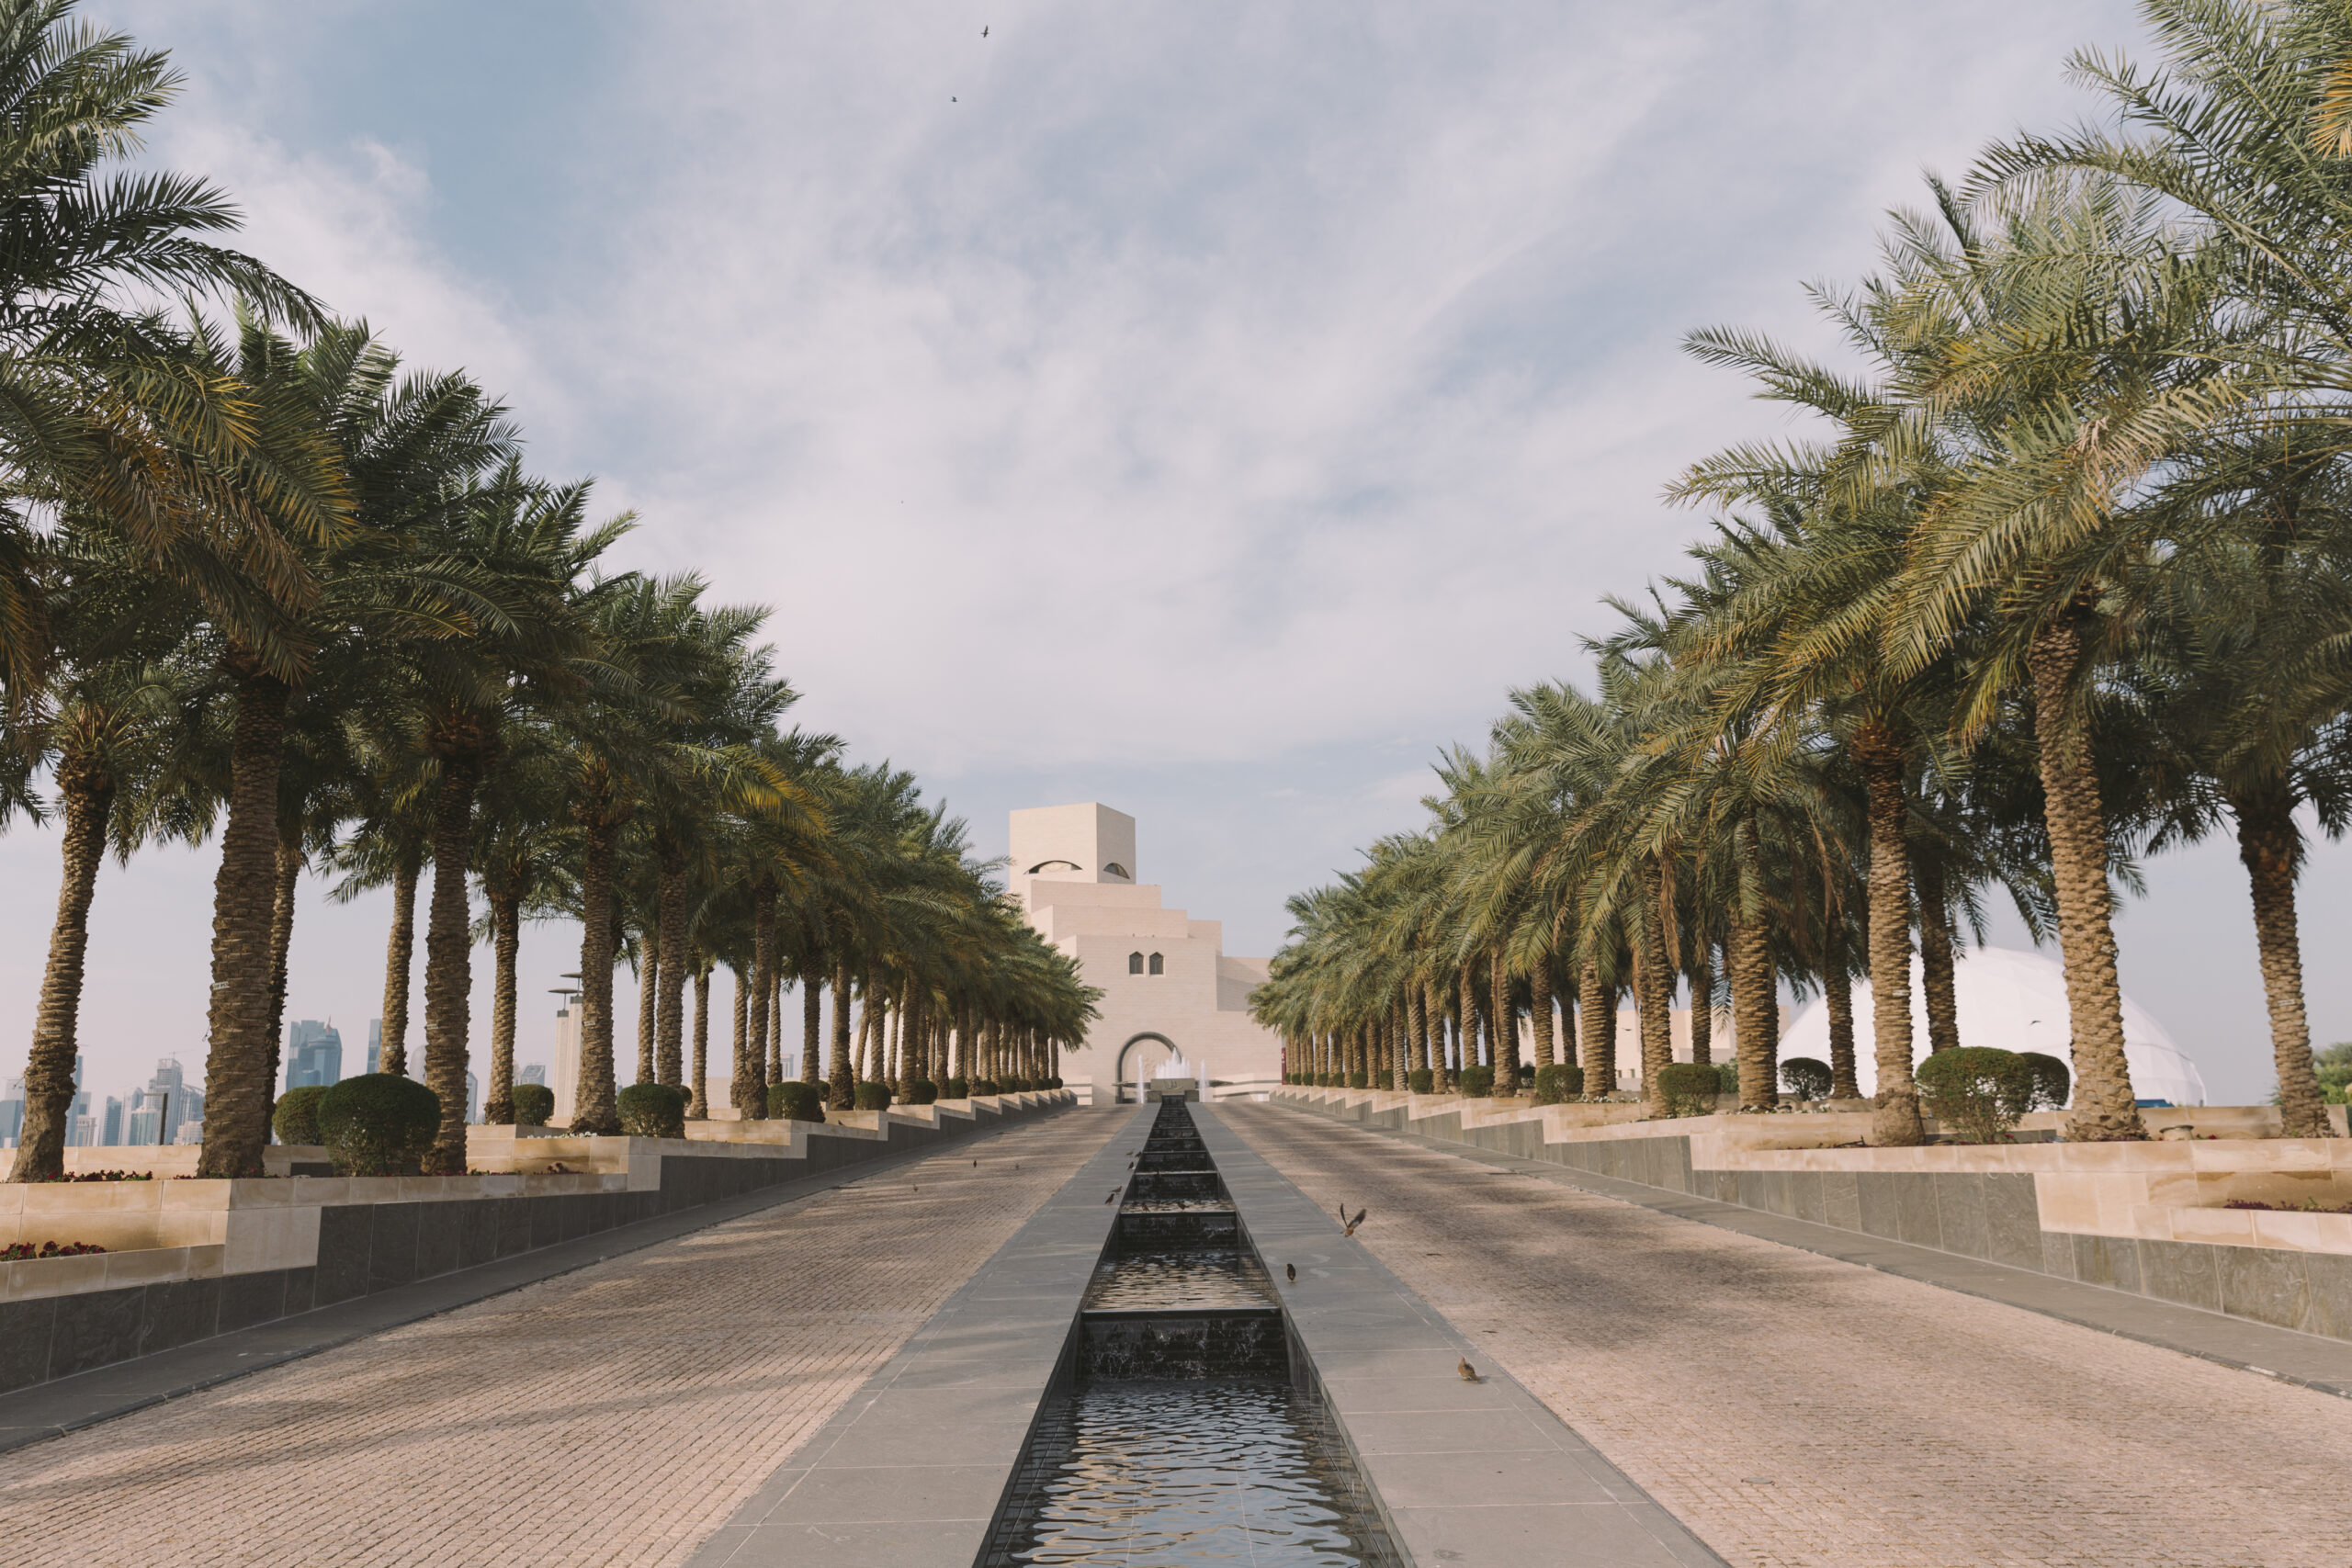 10 days in Doha: What to see, do and eat